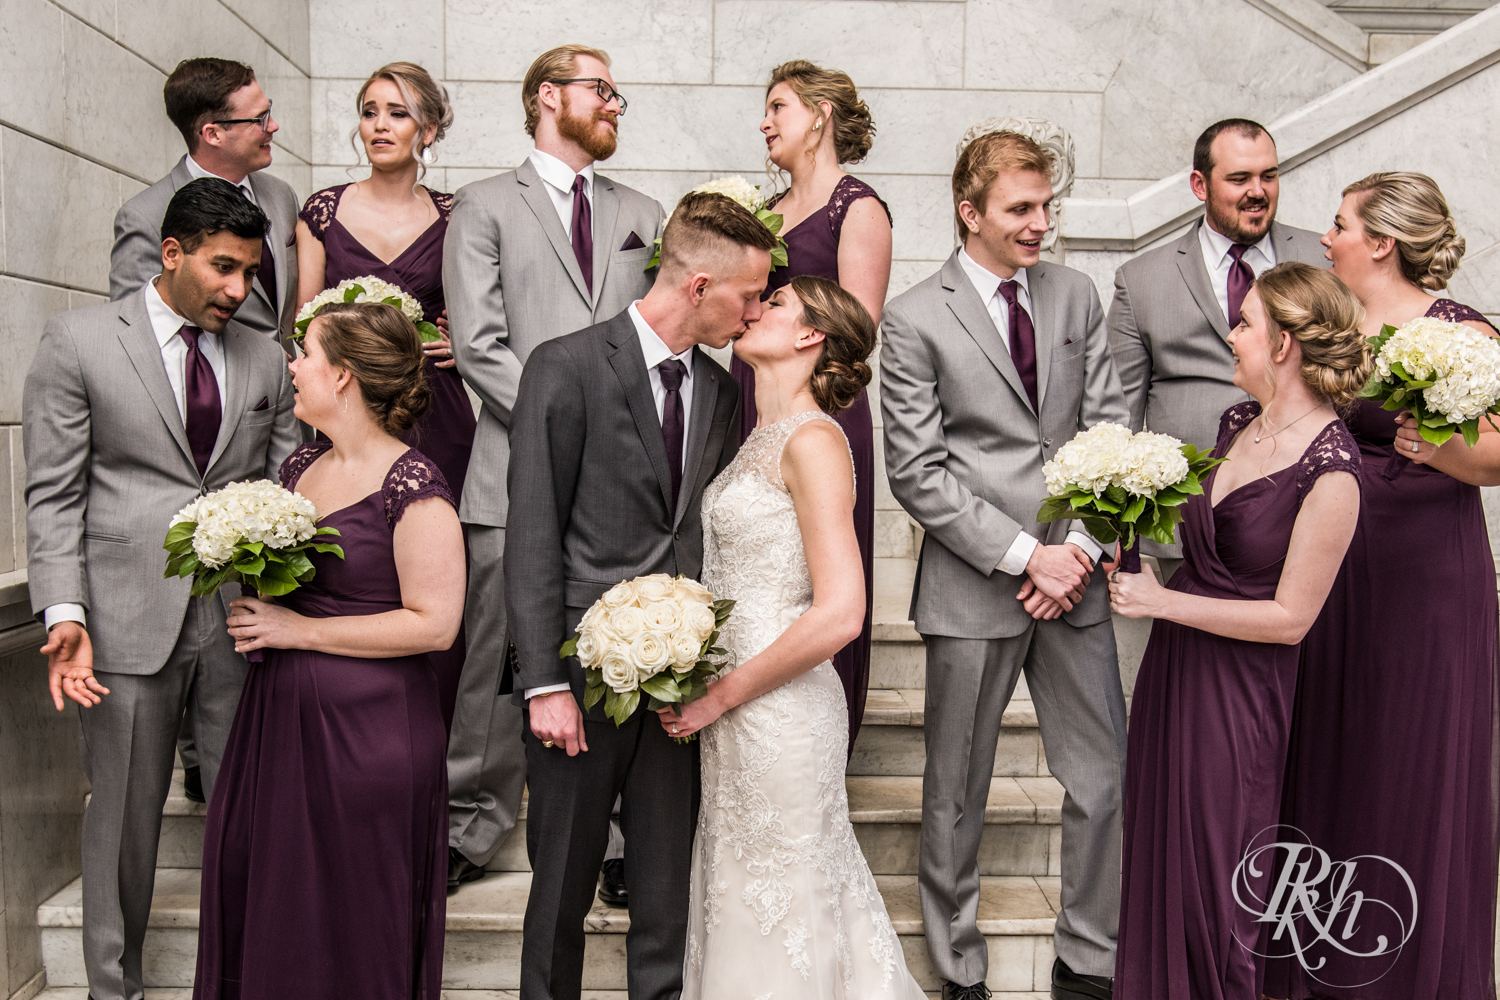 Bride and groom kiss amidst wedding party in the Lumber Exchange Event Center in Minneapolis, Minnesota.